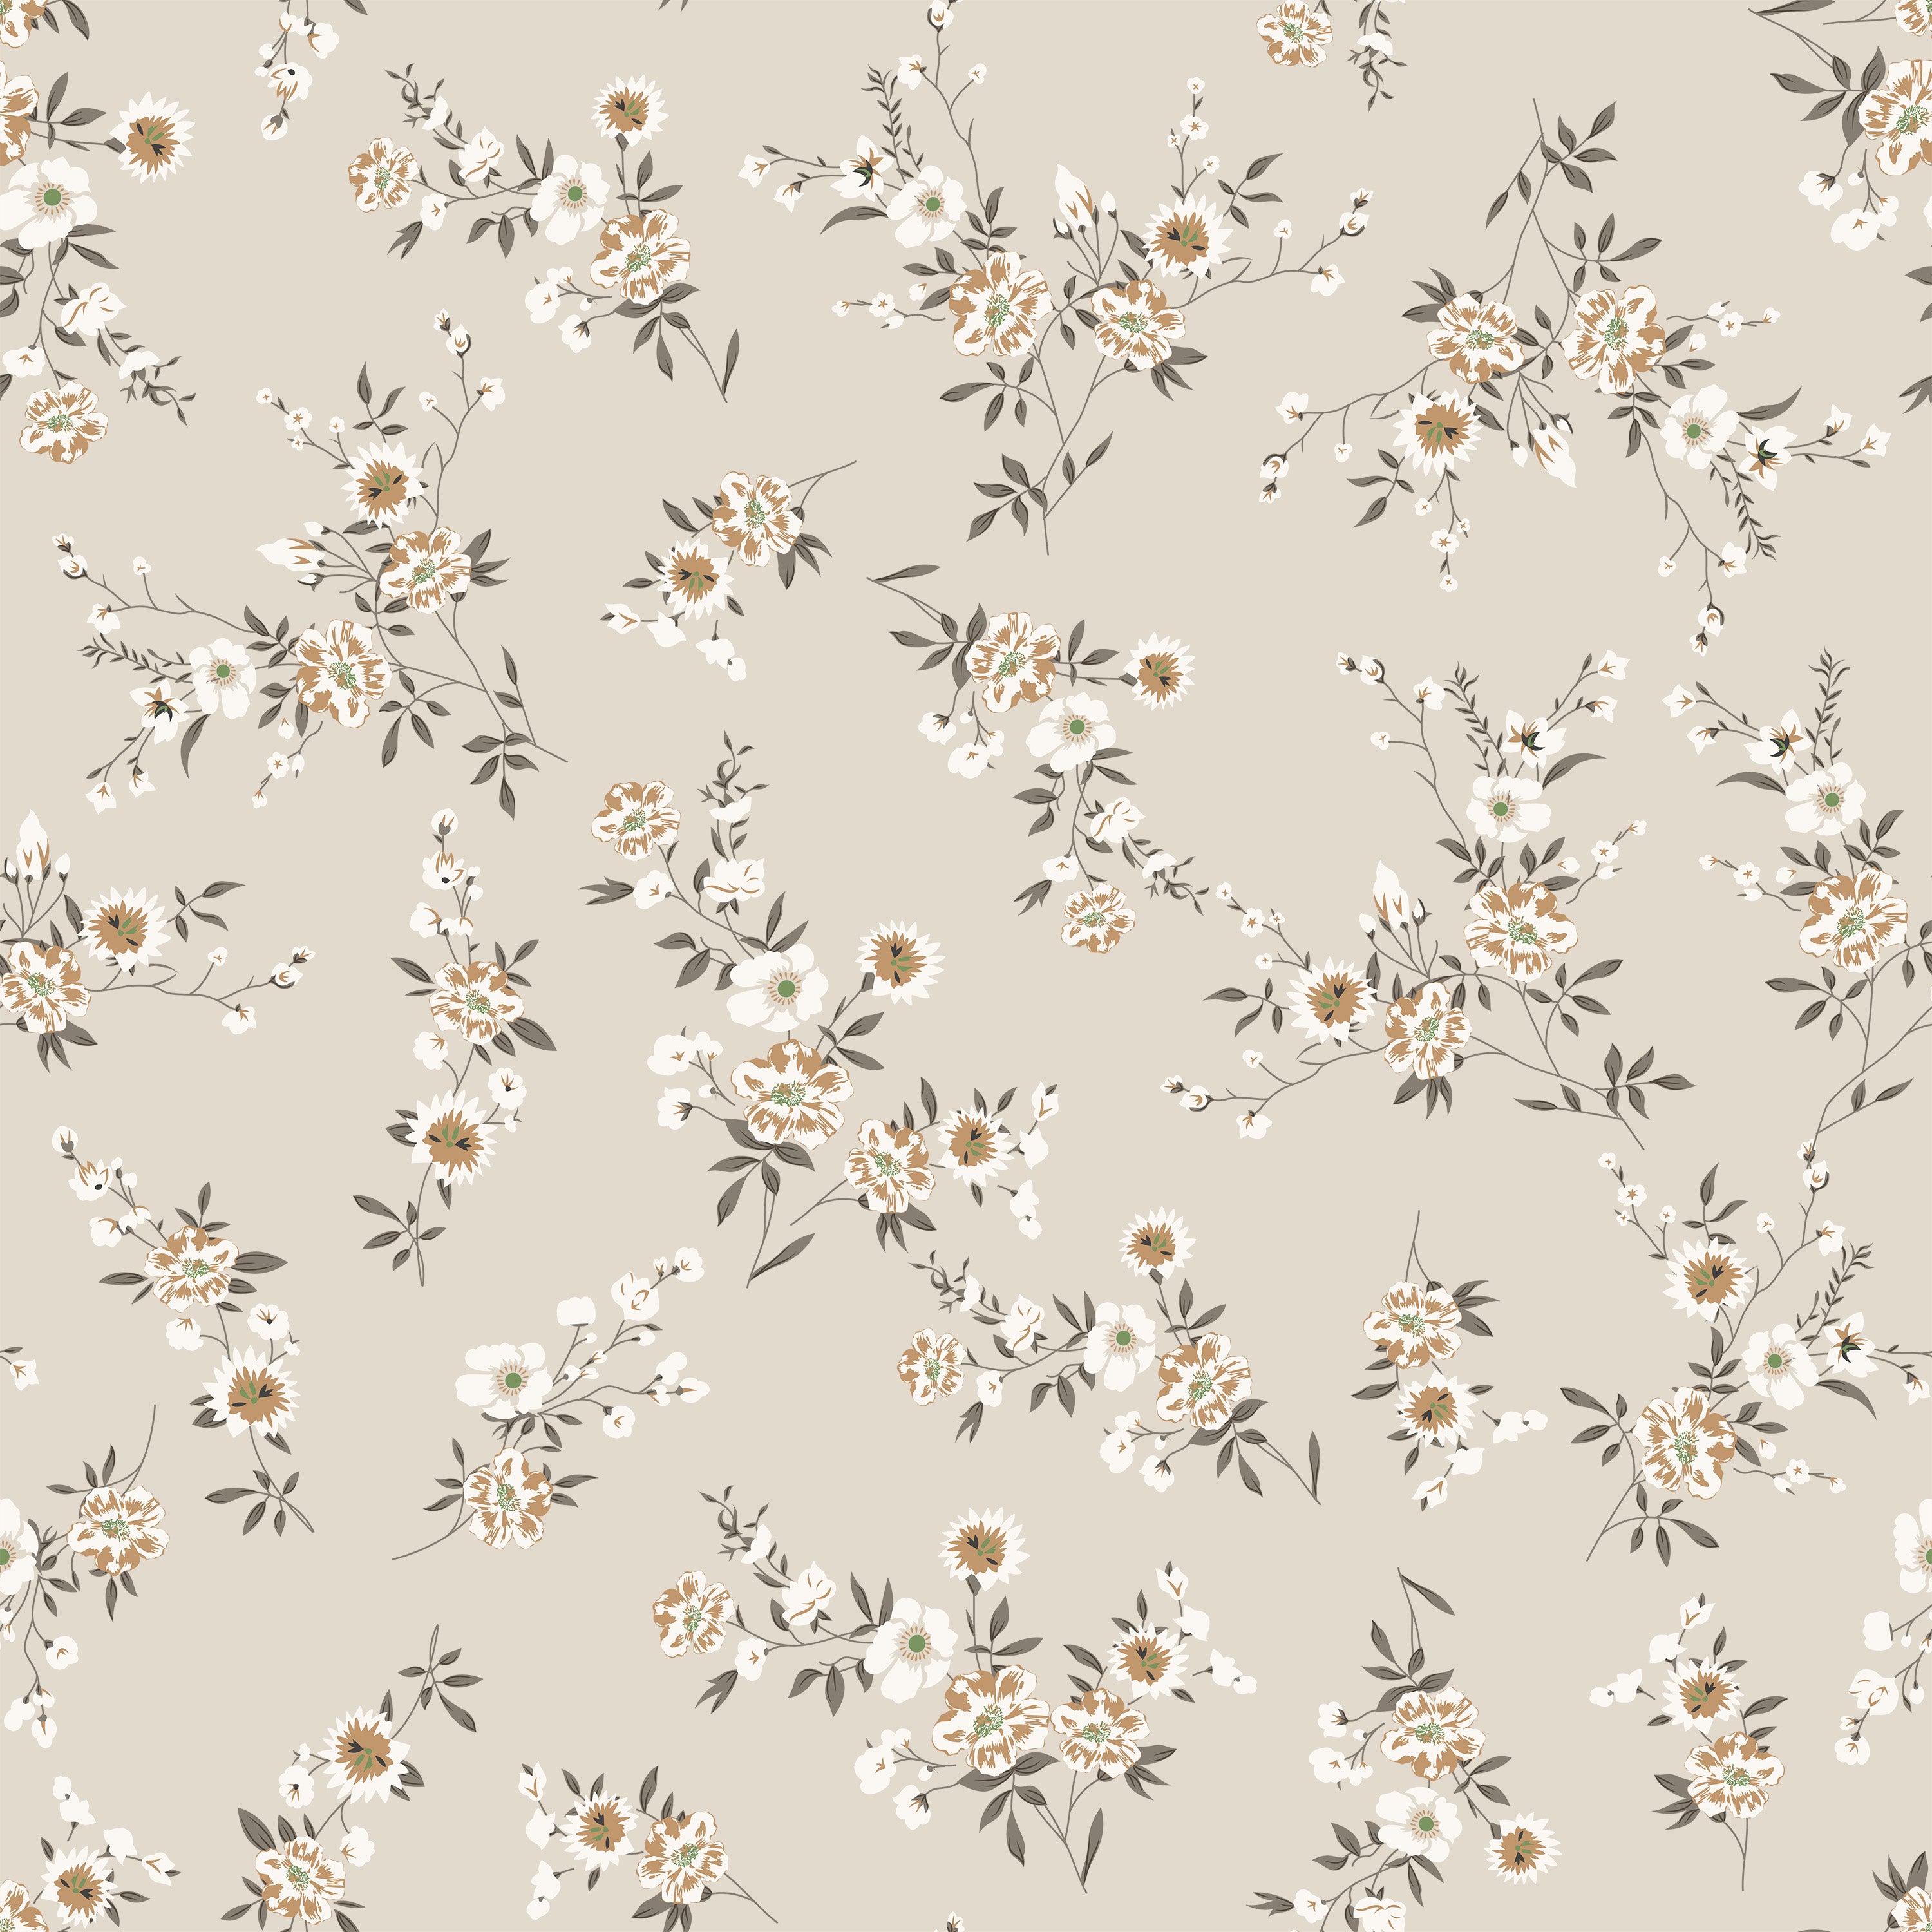 a close-up view of "Classic Floral Wallpaper - Ecru - 12.5" displaying an elegant pattern of white and beige florals and foliage on a neutral ecru background. The design exudes a timeless sophistication, with each flower delicately detailed to convey a sense of depth and texture.